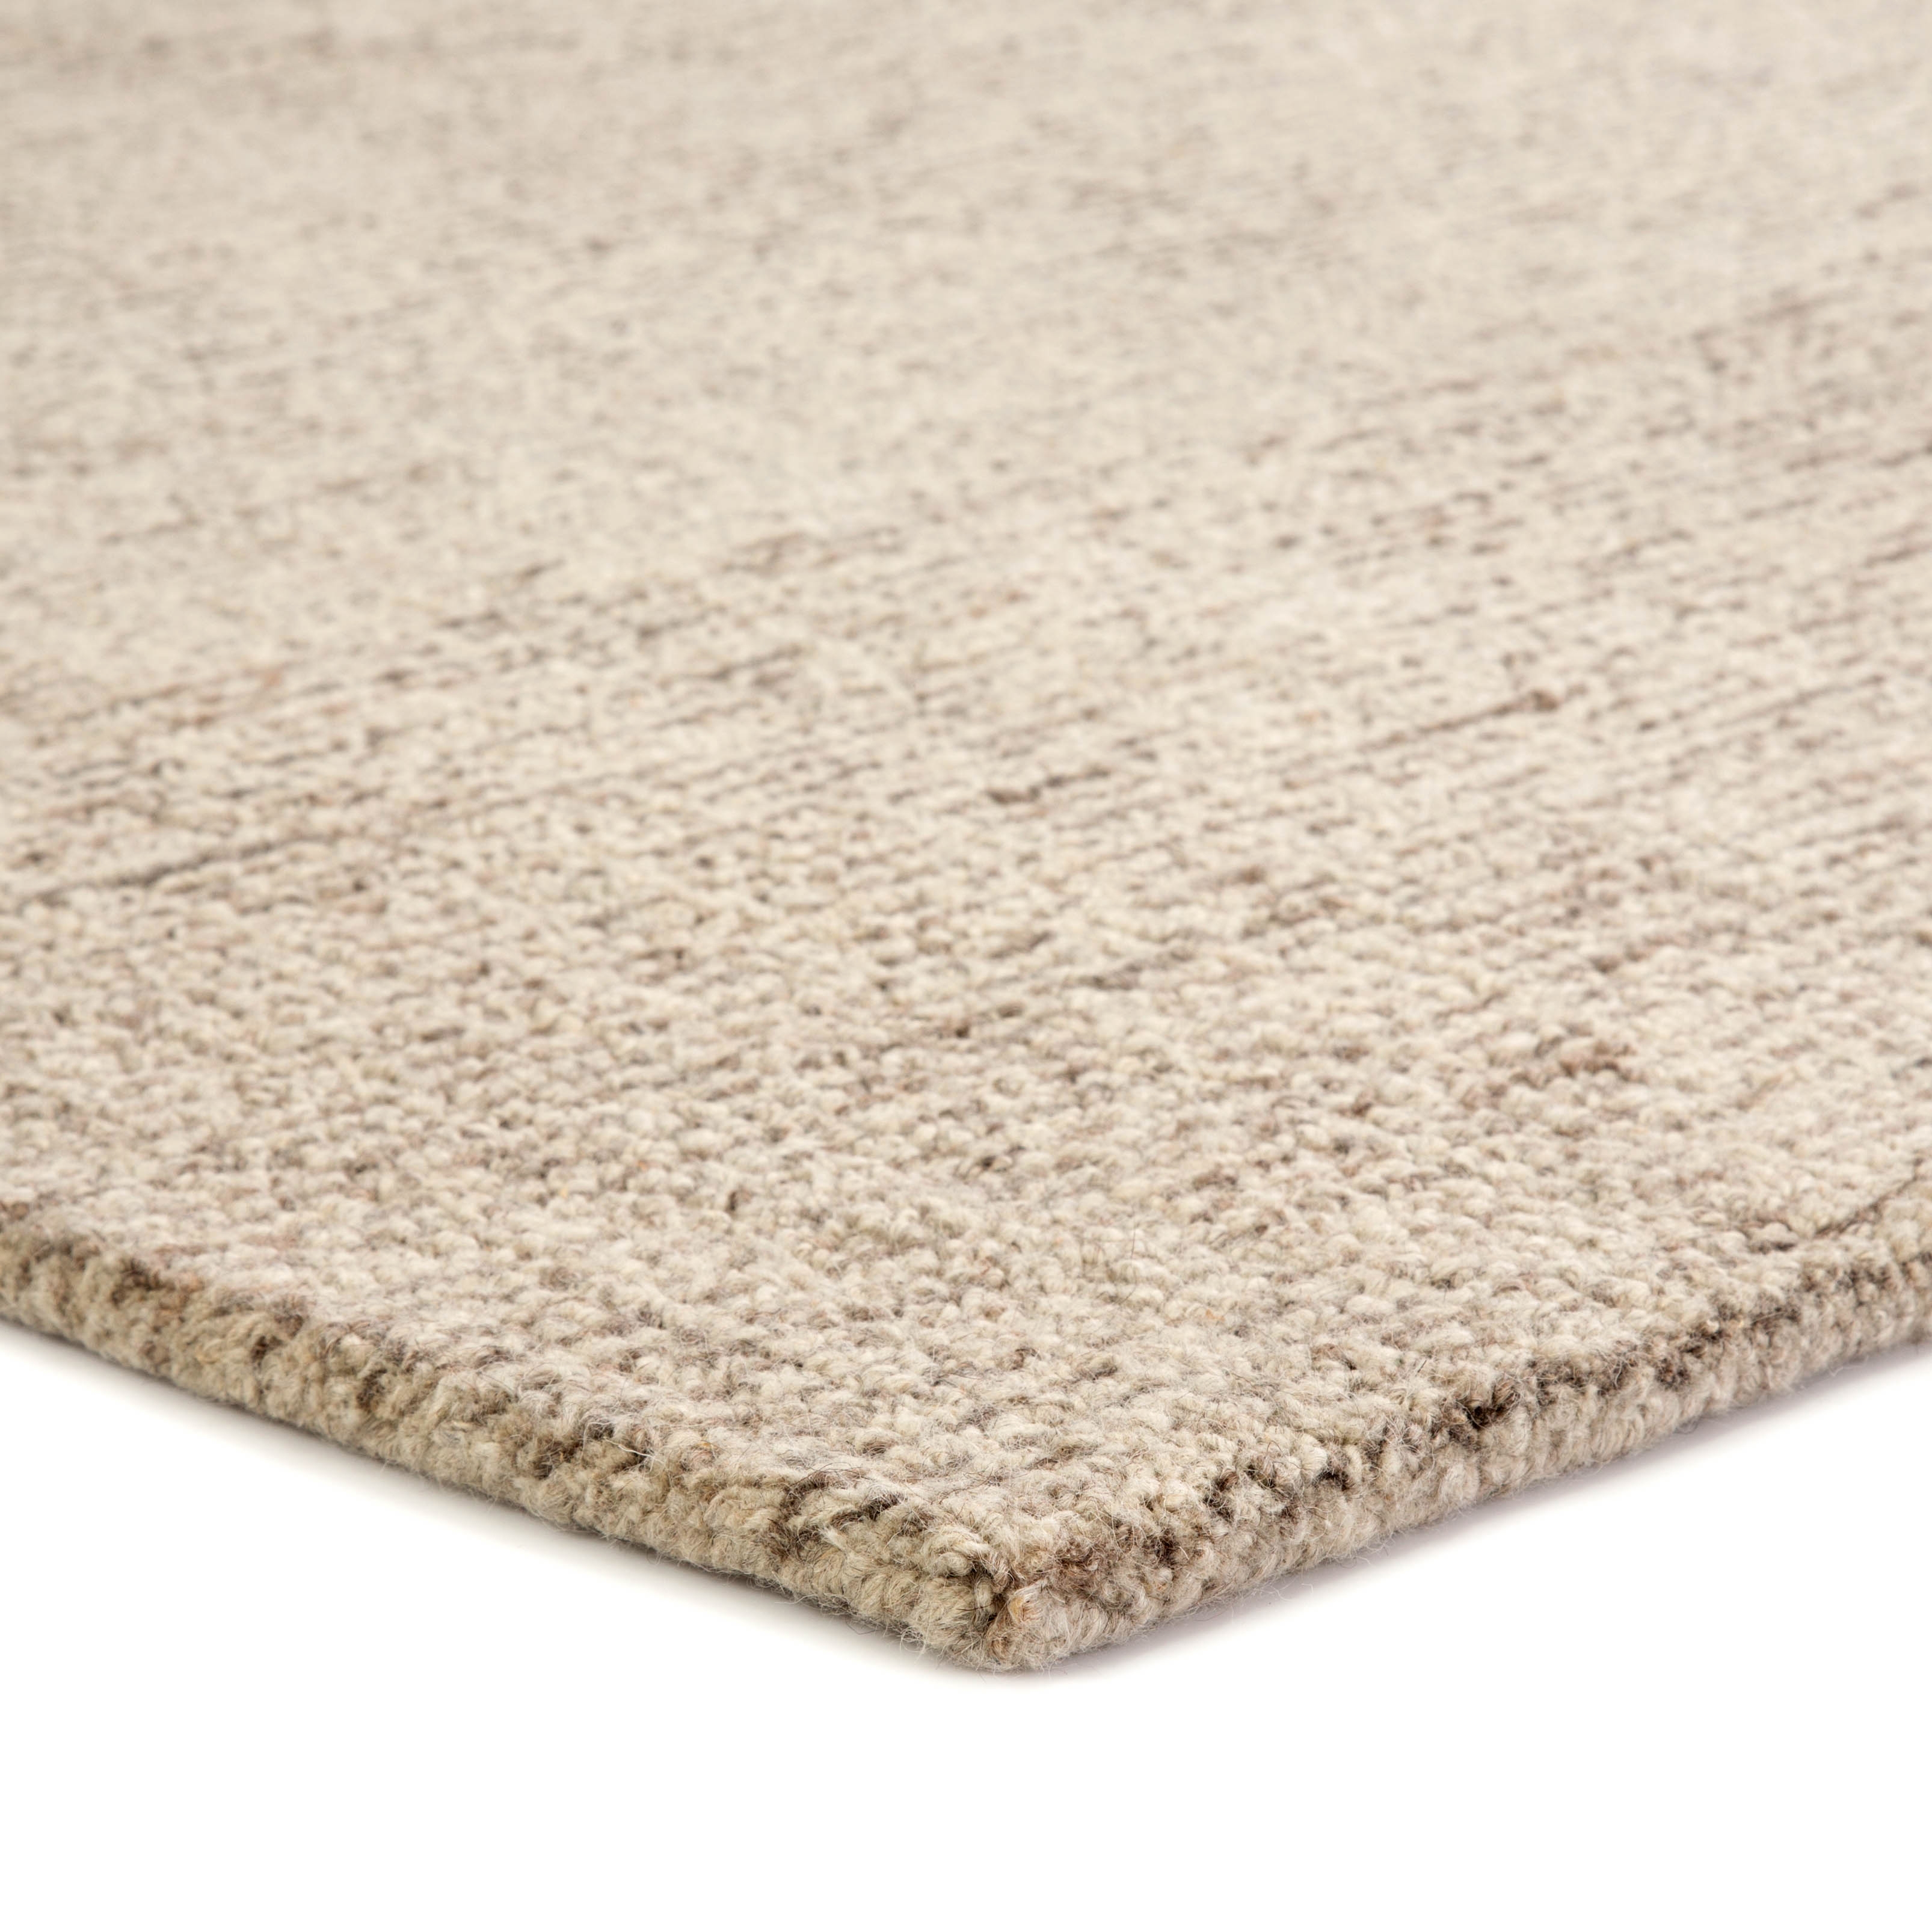 Oland Handmade Solid White/ Brown Area Rug (2' X 3') - Image 1